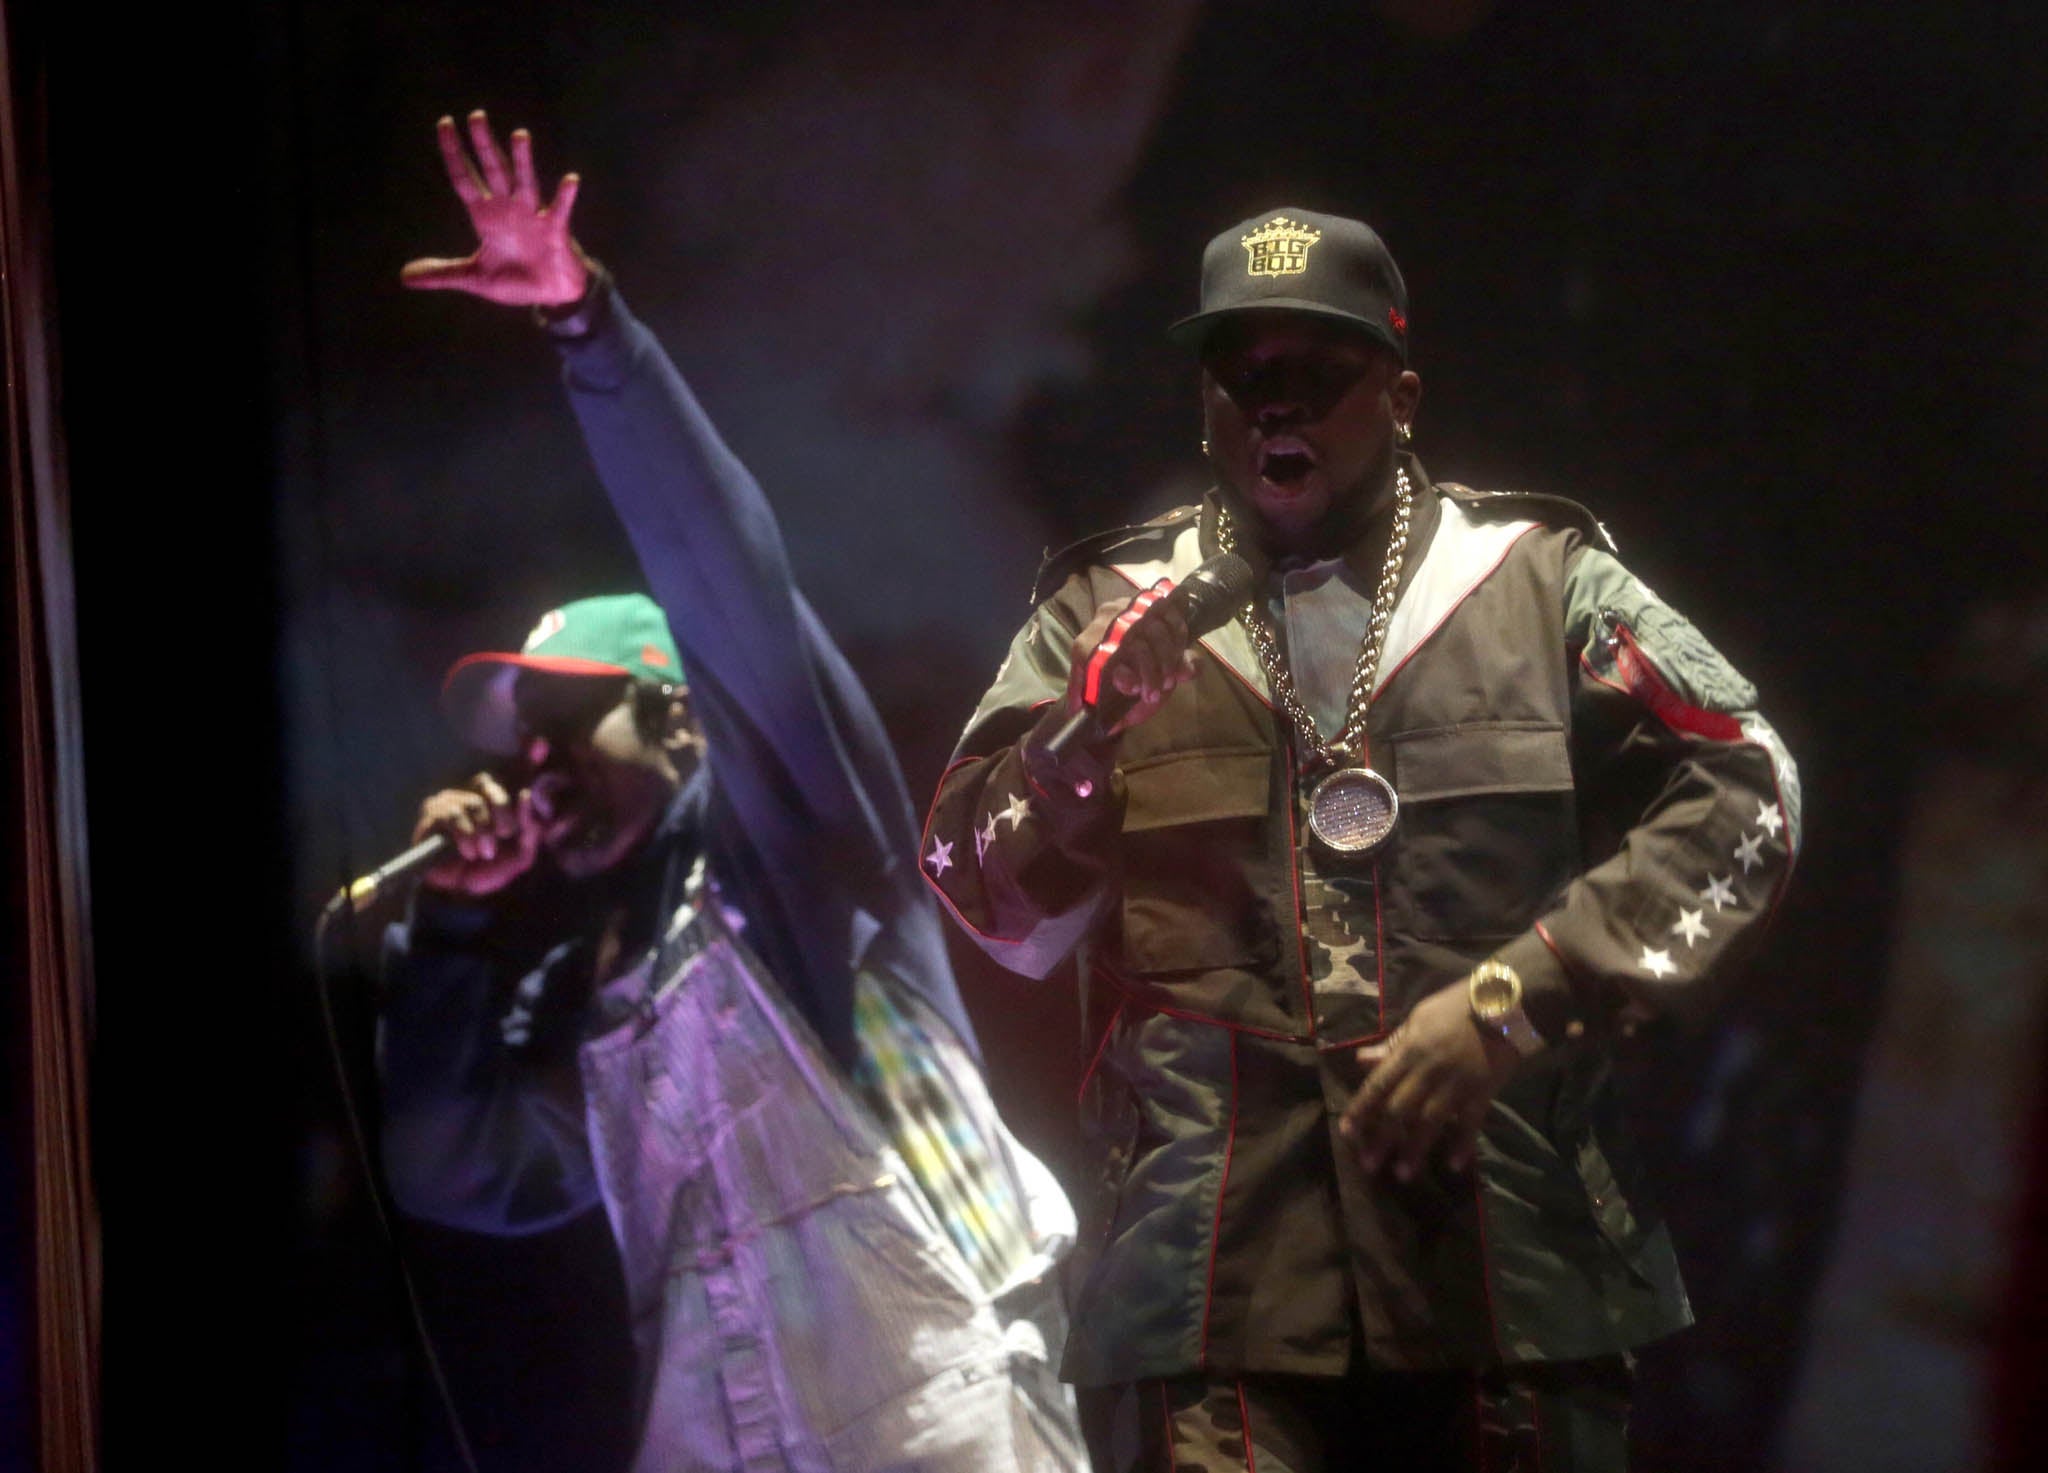 Rappers Andre 3000 (L) and Big Boi of OutKast perform onstage during day 1 of Coachella 2014